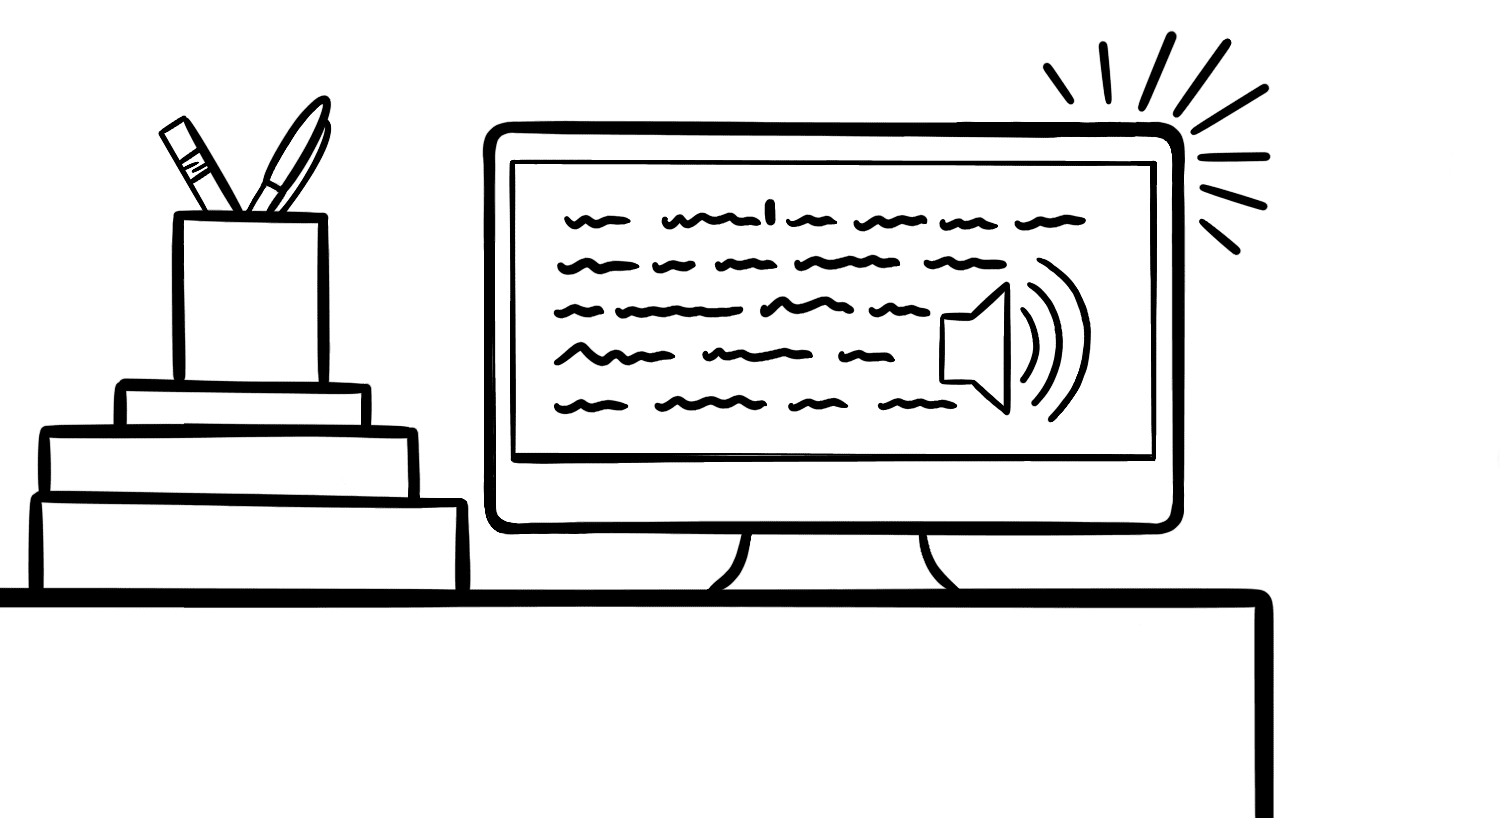 Illustration: A desktop computer sits on a desk, with a Voiceover program reading text on the screen out loud. Beside the computer is a stack of books and a cup full of pens.